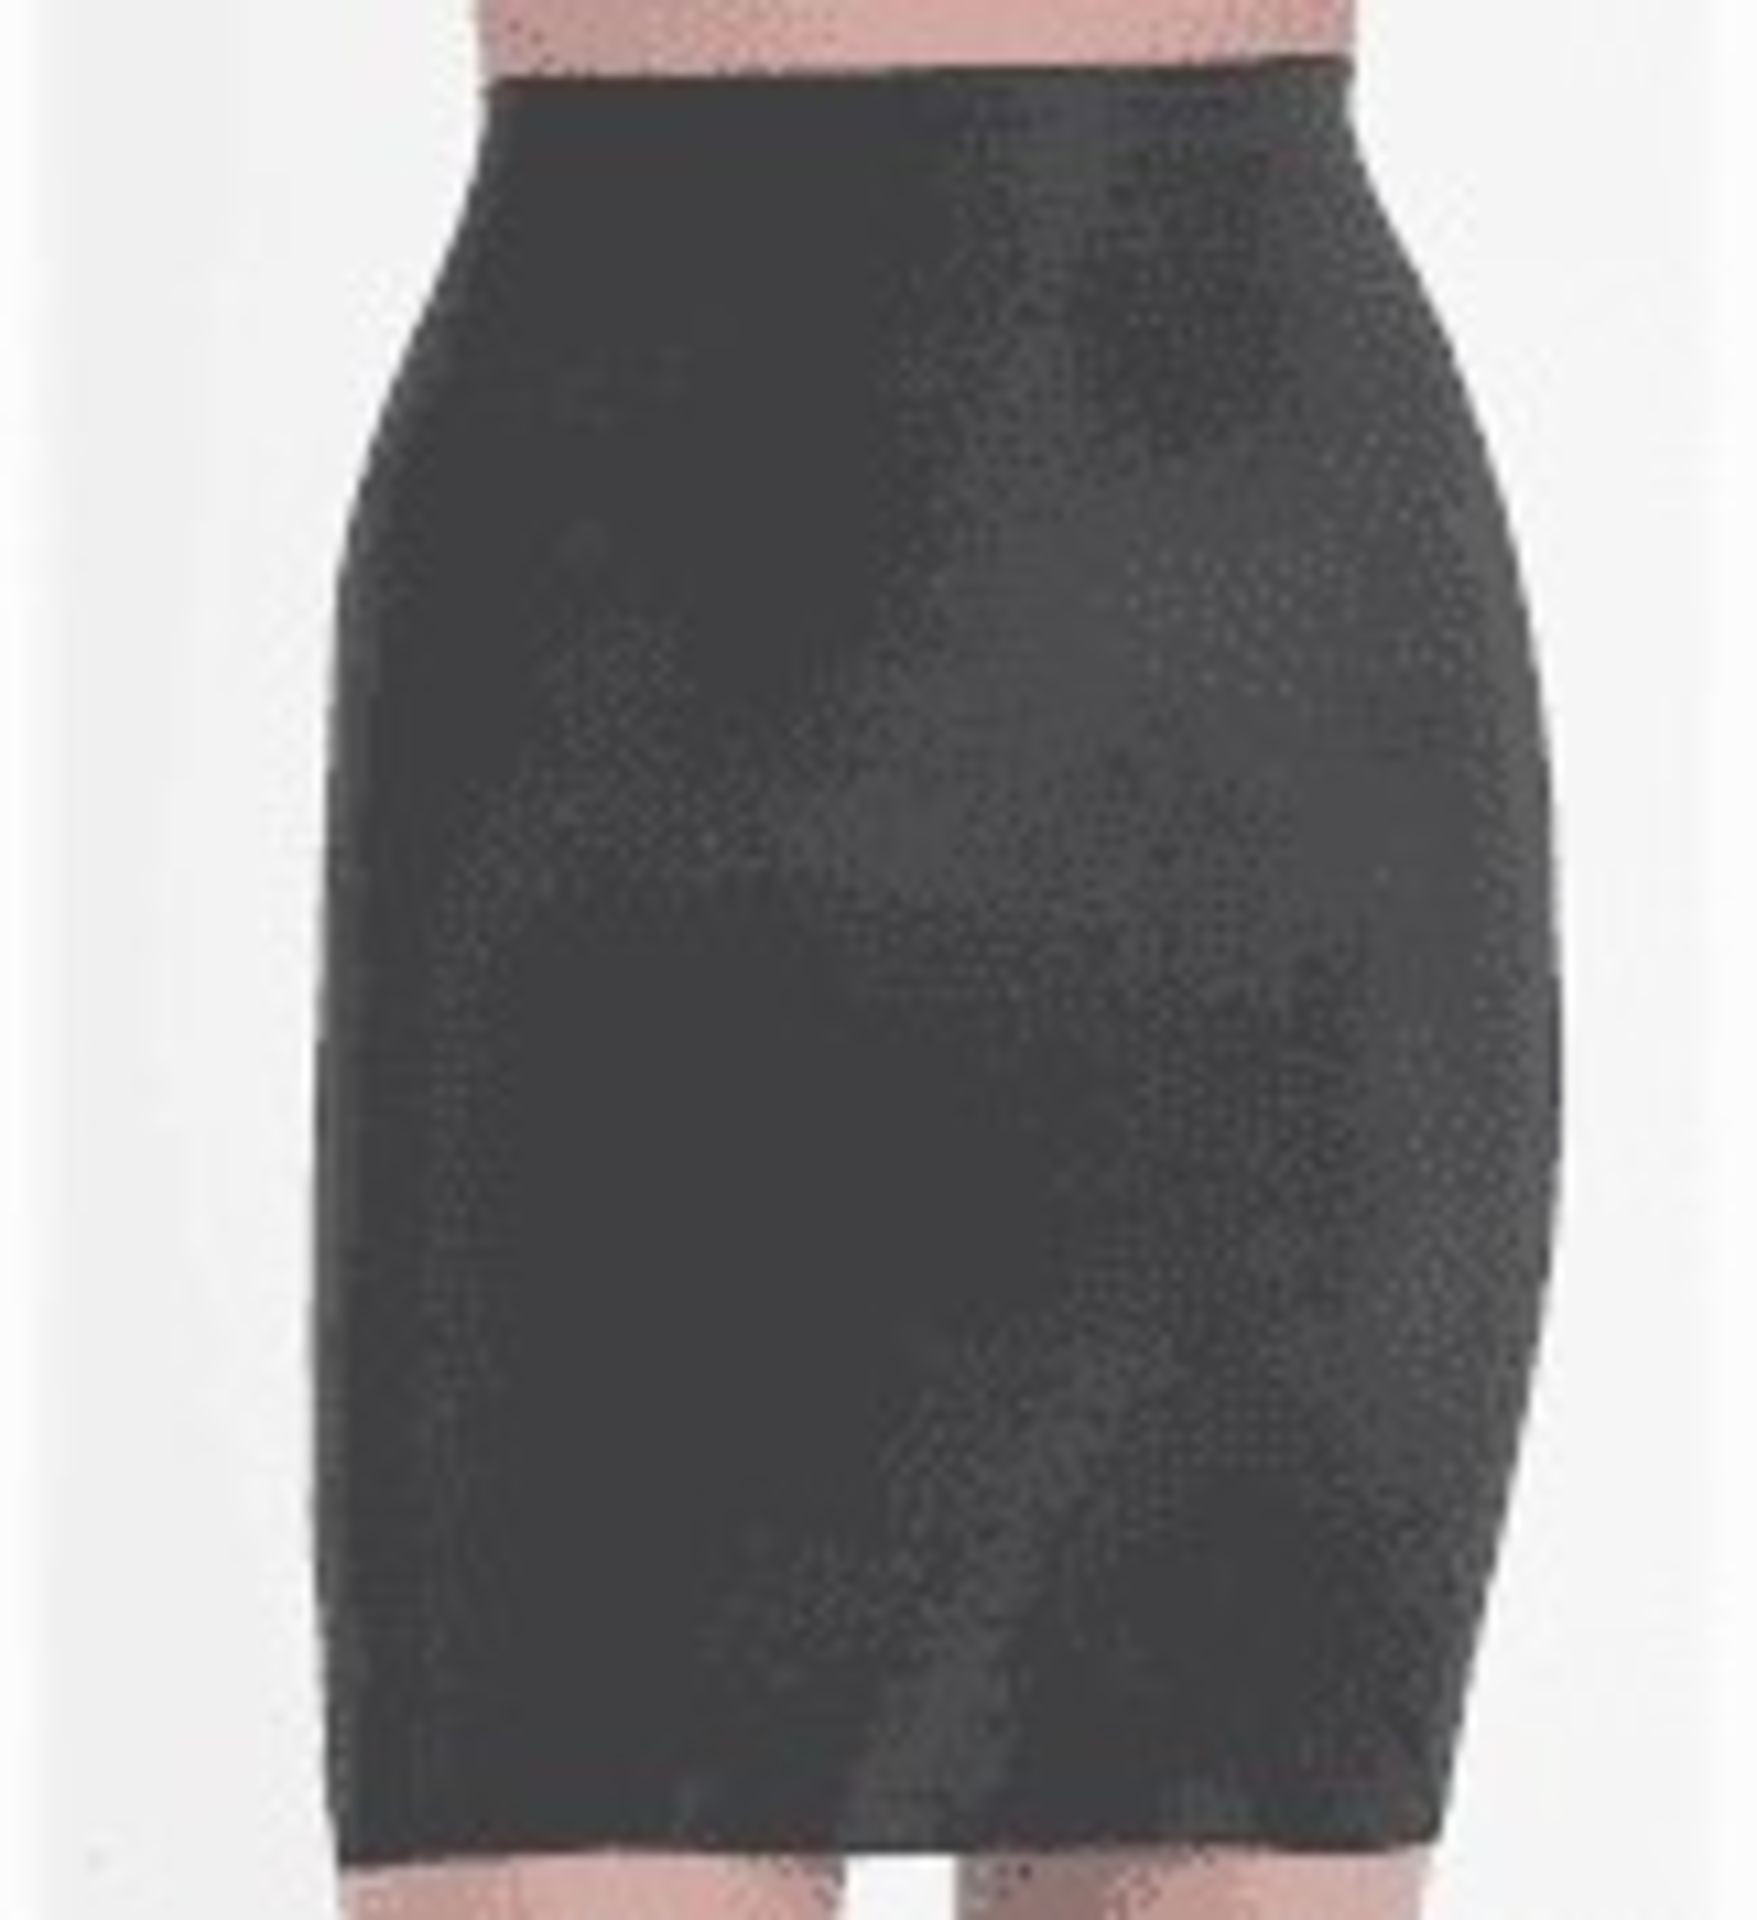 1 LOT TO CONTAIN 5 SPANX SKIRTS IN BOLD BACK / SIZE 16 / STYLE 1899 / RRP £440.00 (PUBLIC VIEWING